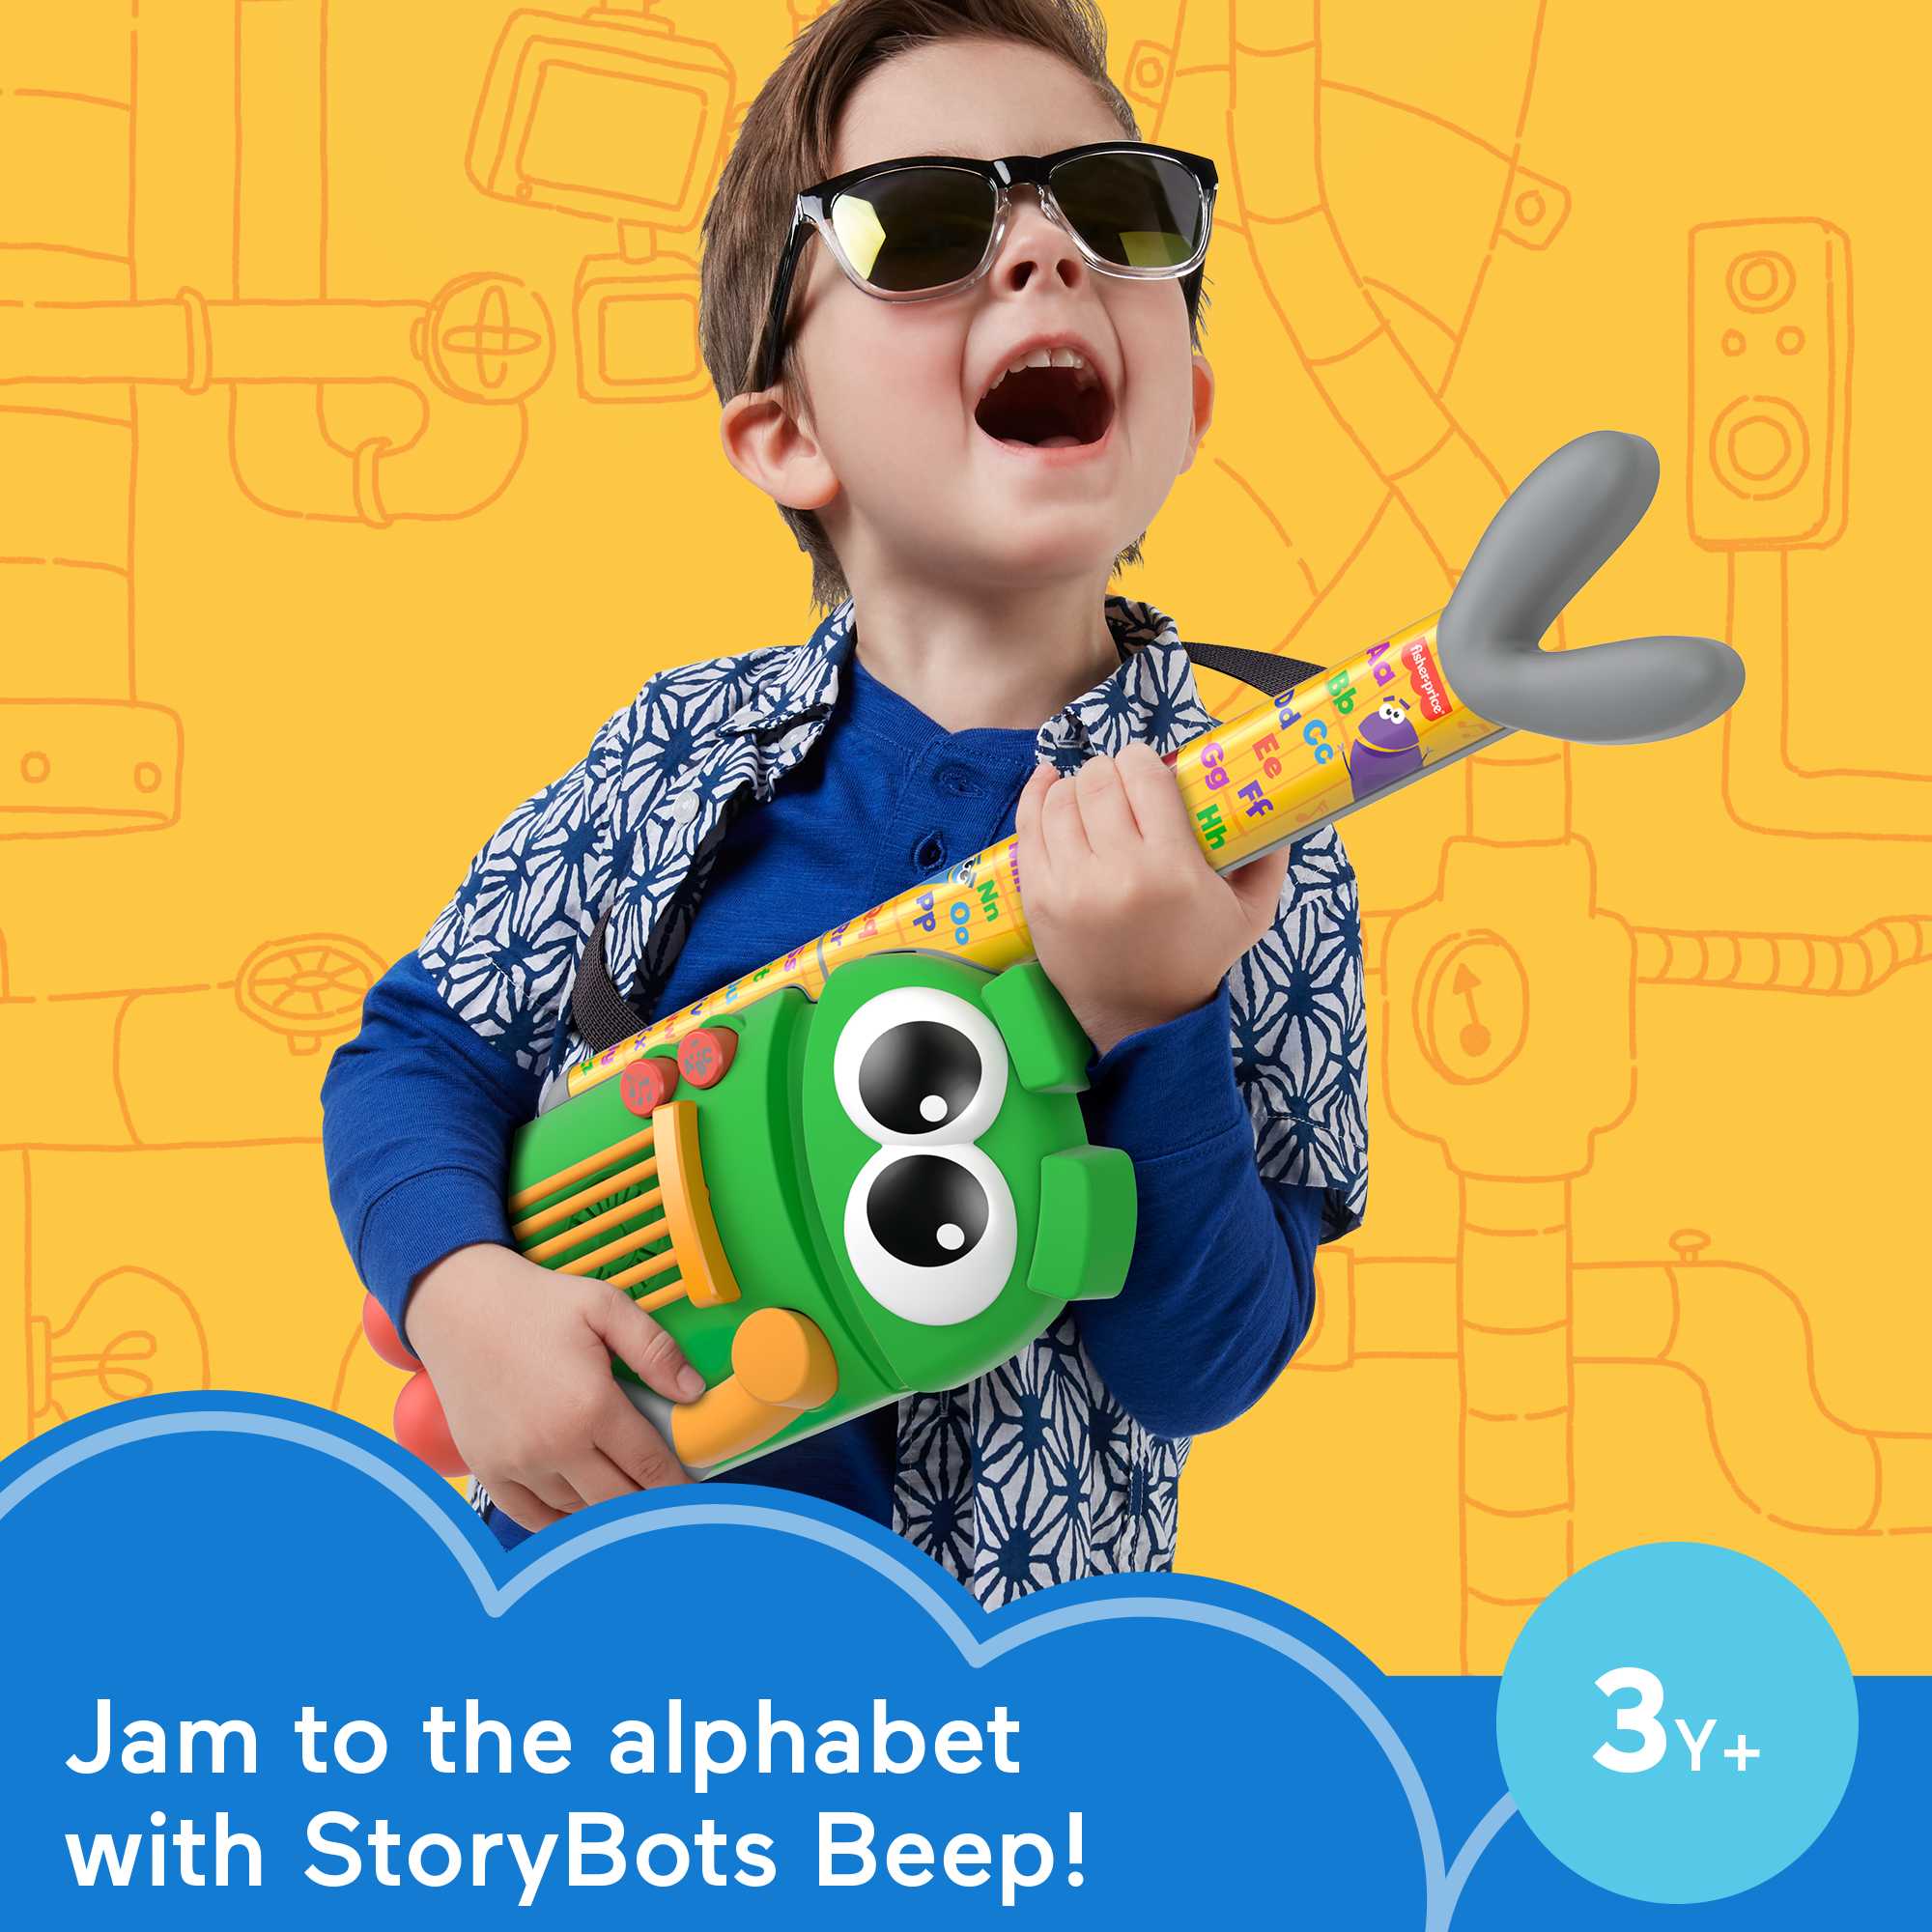 Fisher-Price StoryBots A to Z Rock Star Guitar Musical Learning Toy - image 3 of 7